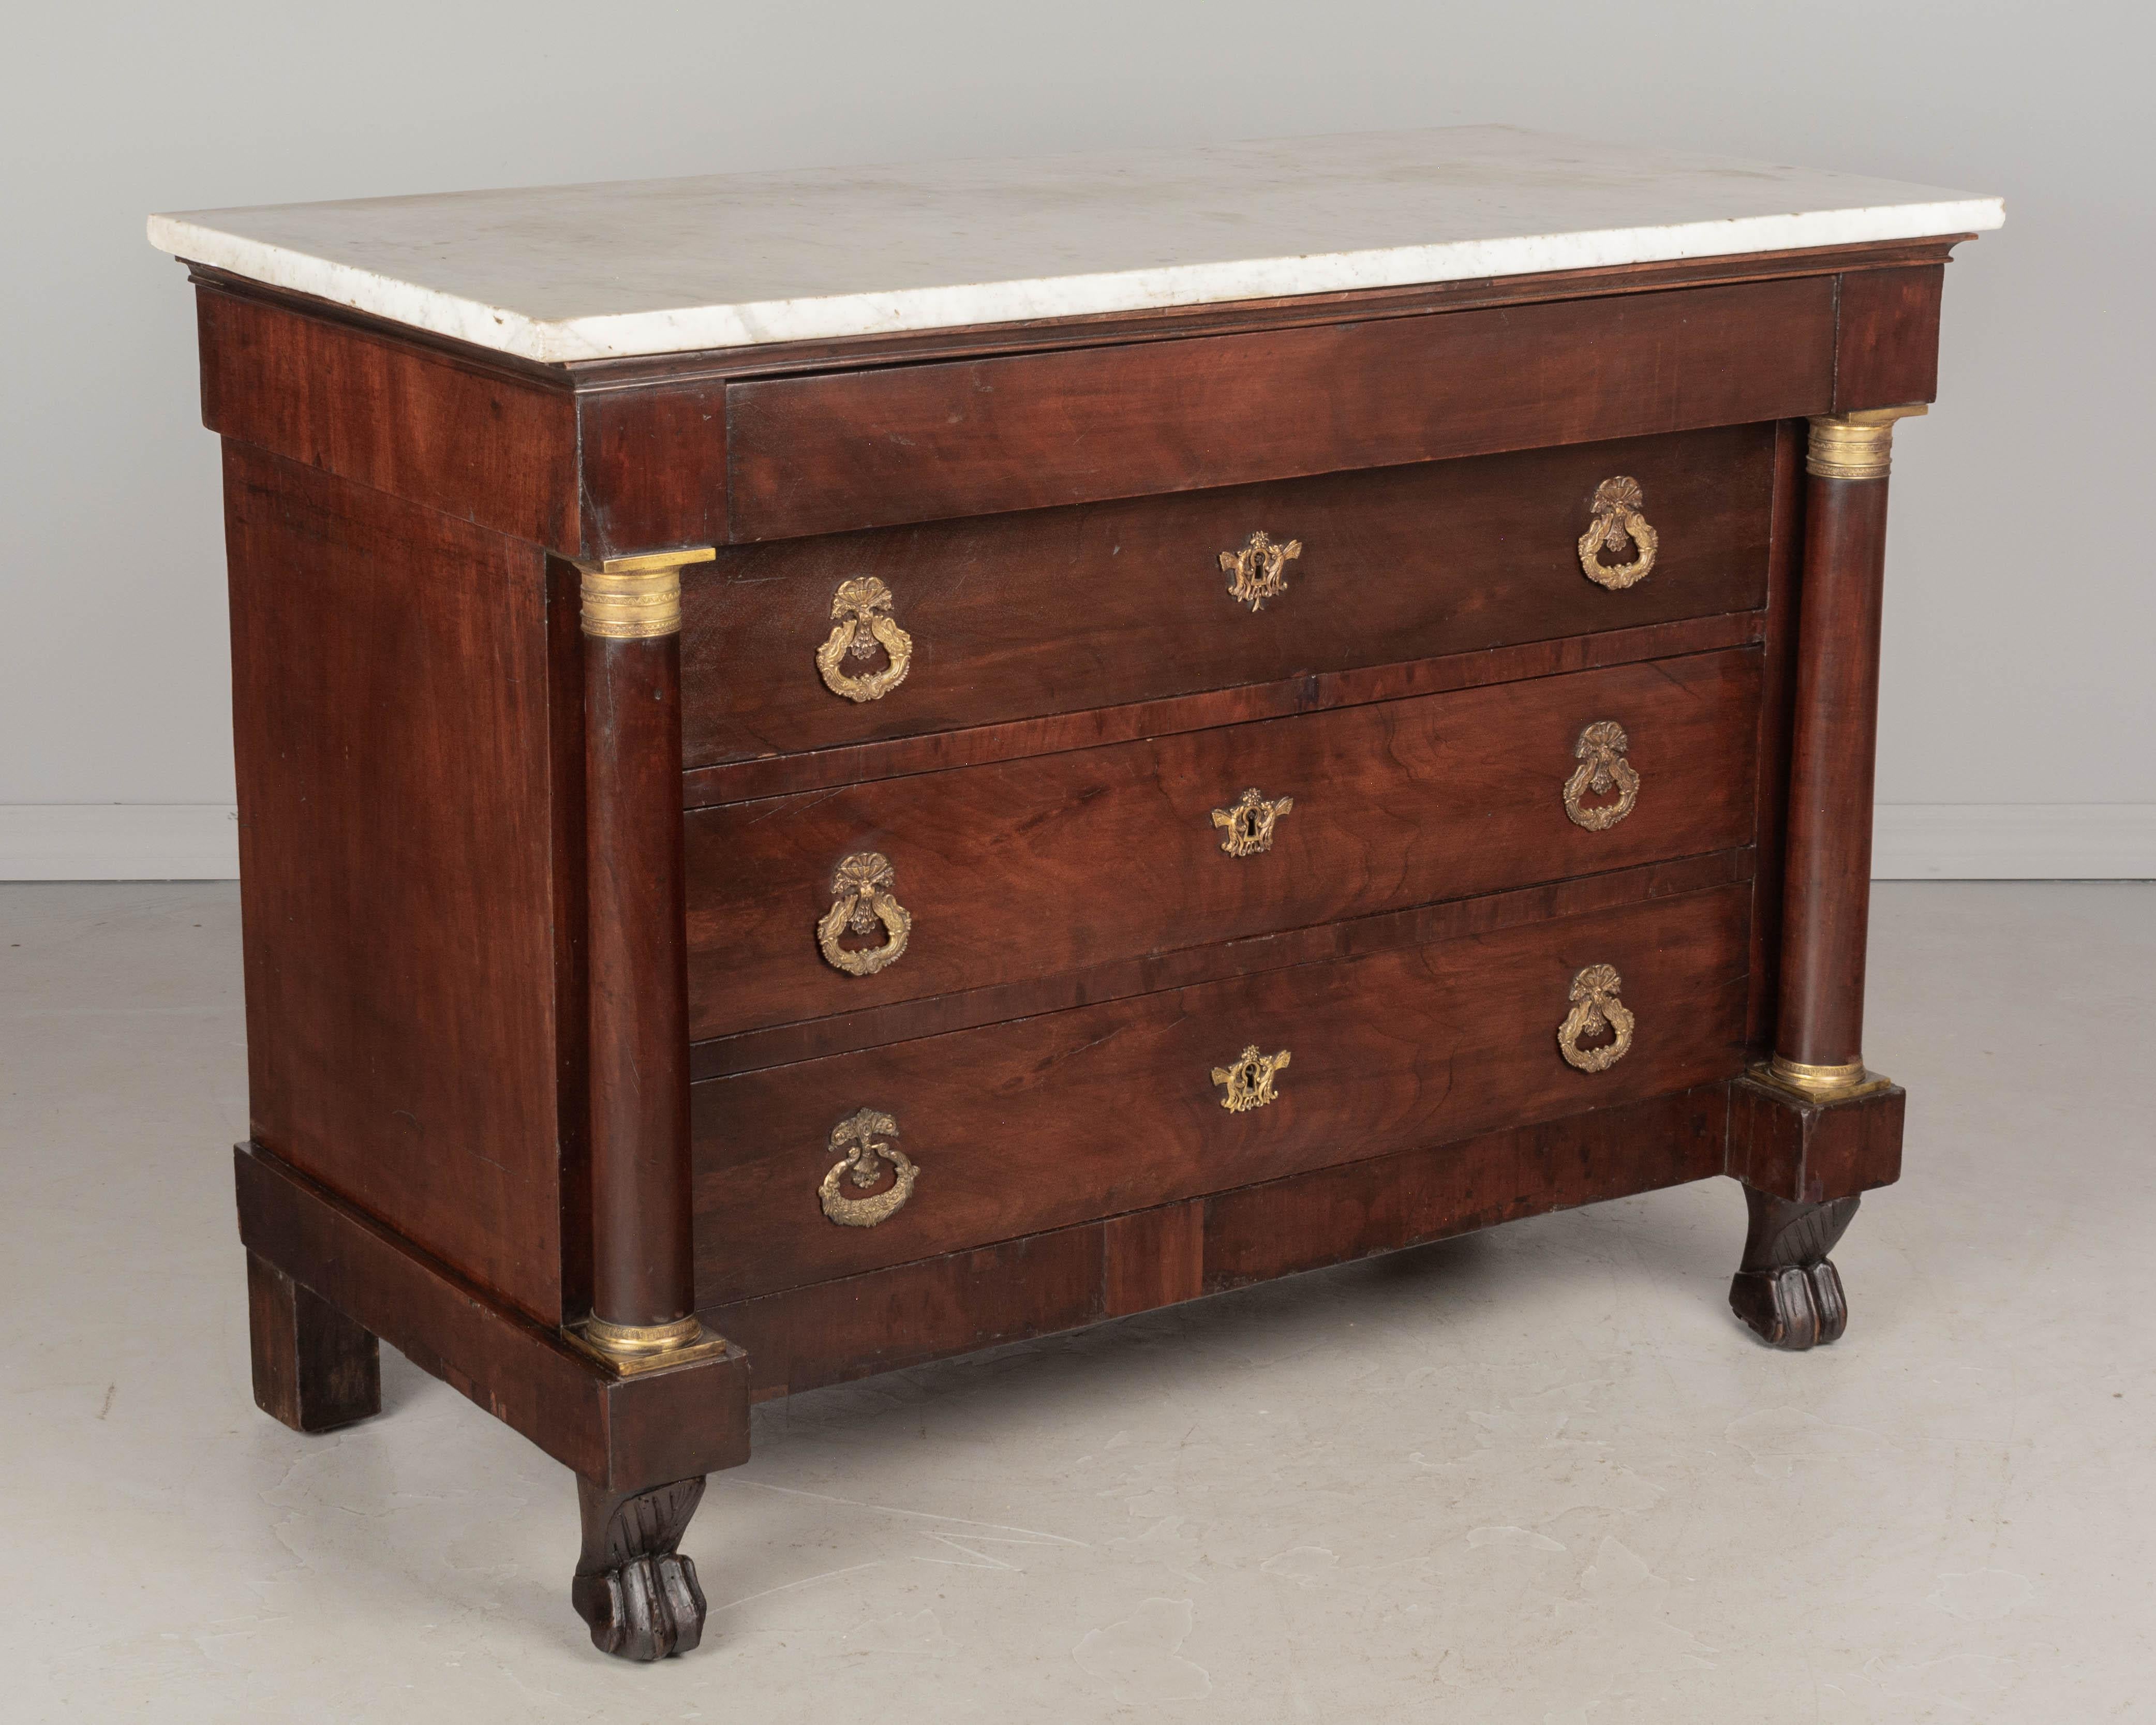 A 19th Century French Empire style commode, or chest of drawers, made of solid and veneer of mahogany. Four dovetailed drawers: three with decorative cast brass pulls and escutcheons, above one slim hidden drawer. Locks are present but there are no